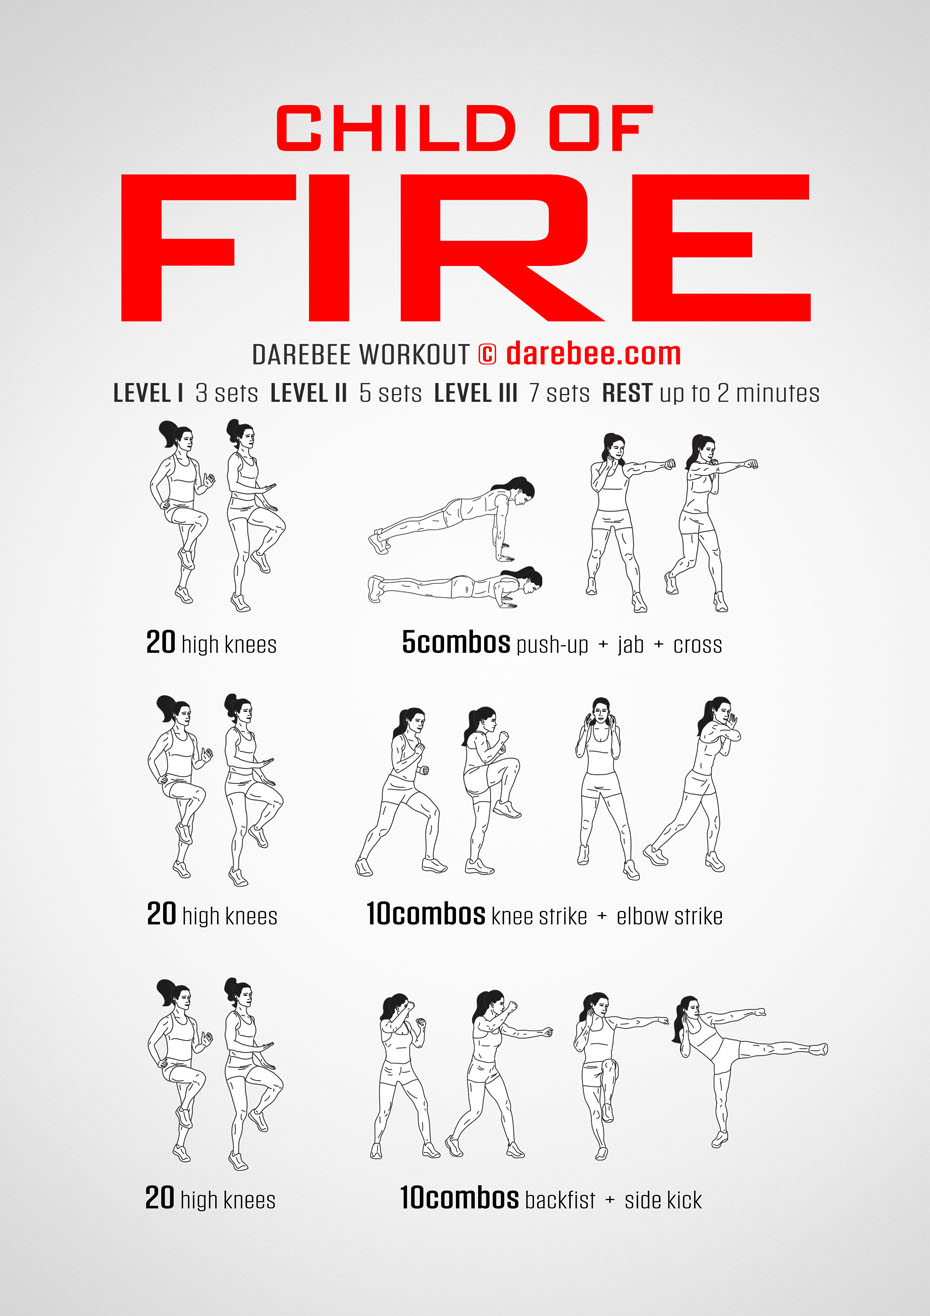 Child Of Fire is a DAREBEE combat moved based home fitness, no-equipment workout that will make you feel completely free in how you choose to move your body.